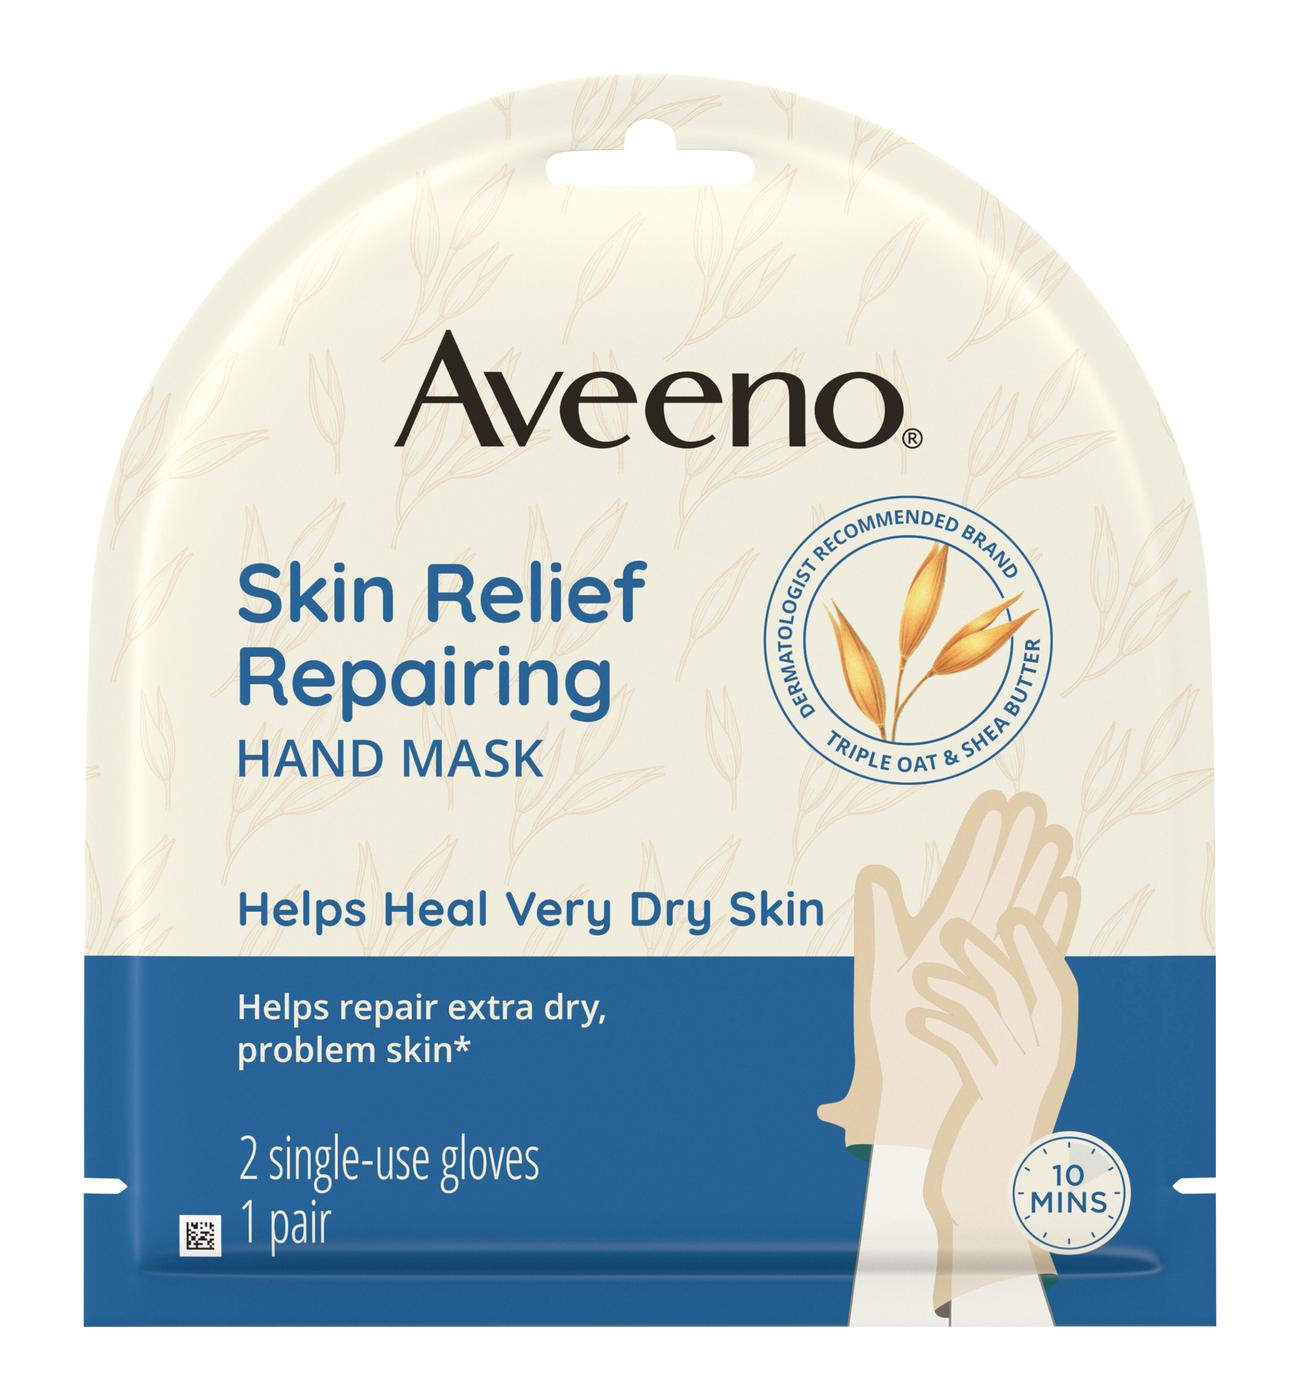 Aveeno Skin Relief Repairing Hand Mask 2 Single-Use Gloves; image 1 of 2